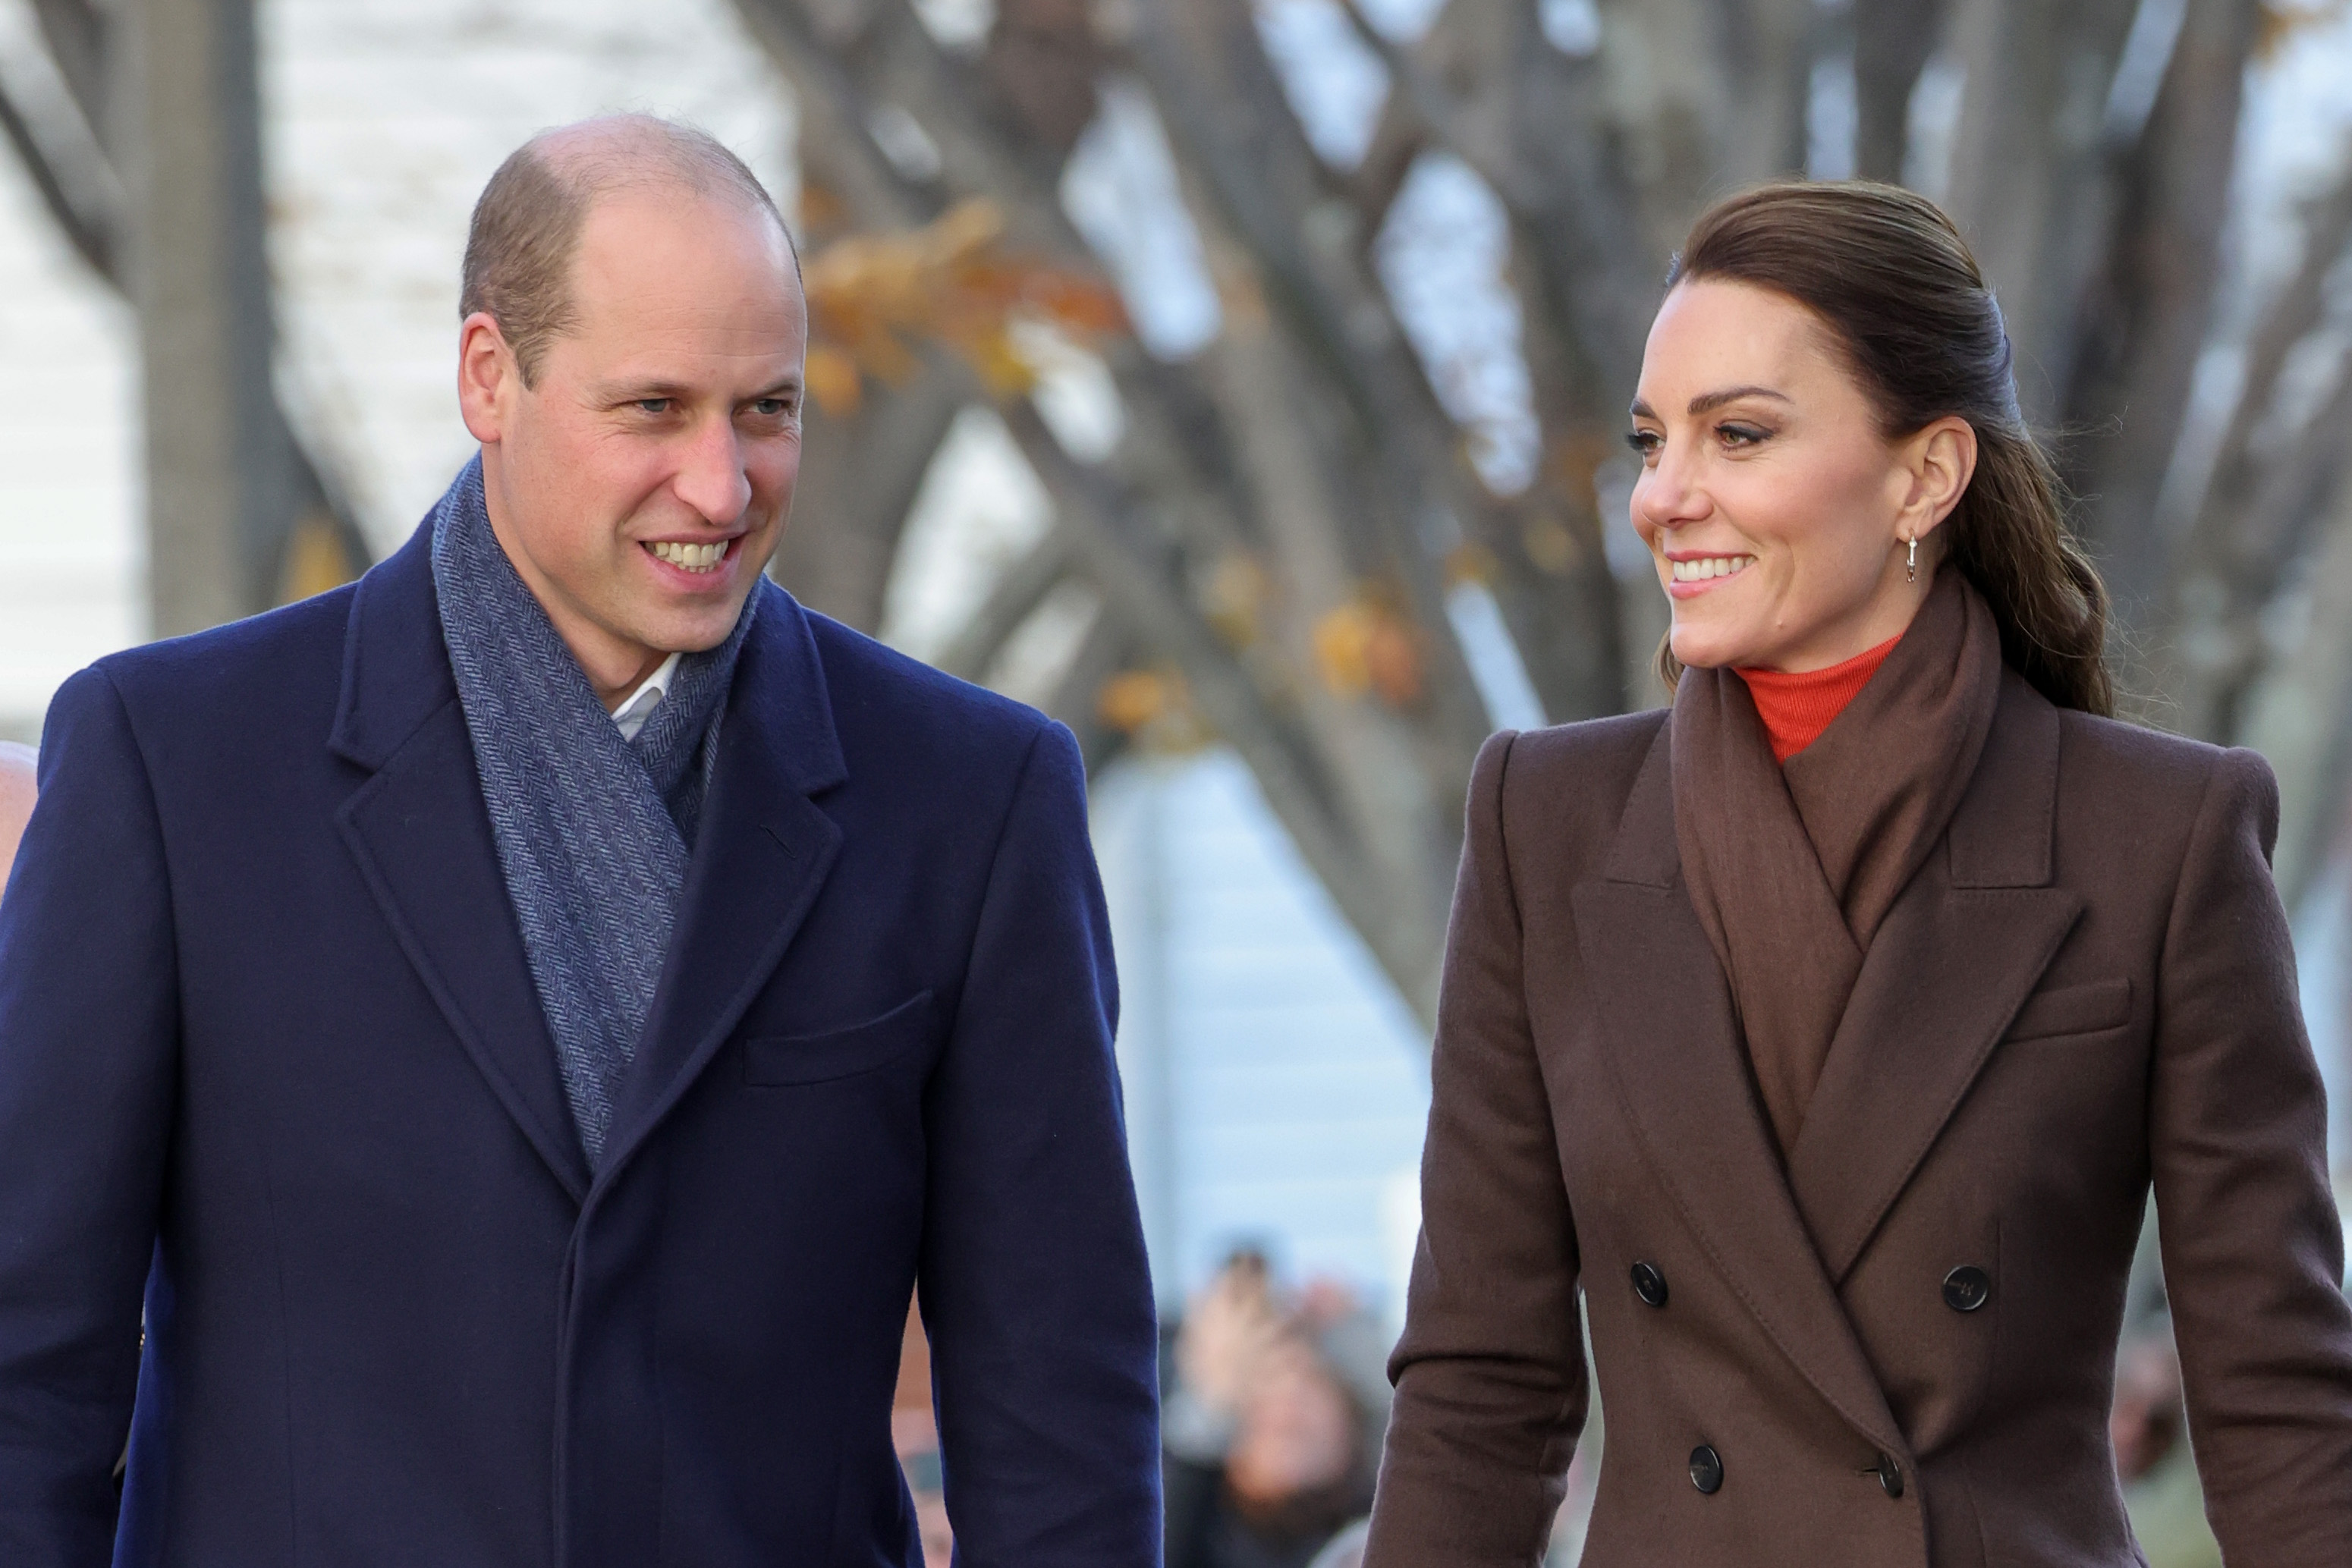 Kate Middleton and Prince William Have ‘Embraced’ Their New Roles Says Body Language Expert